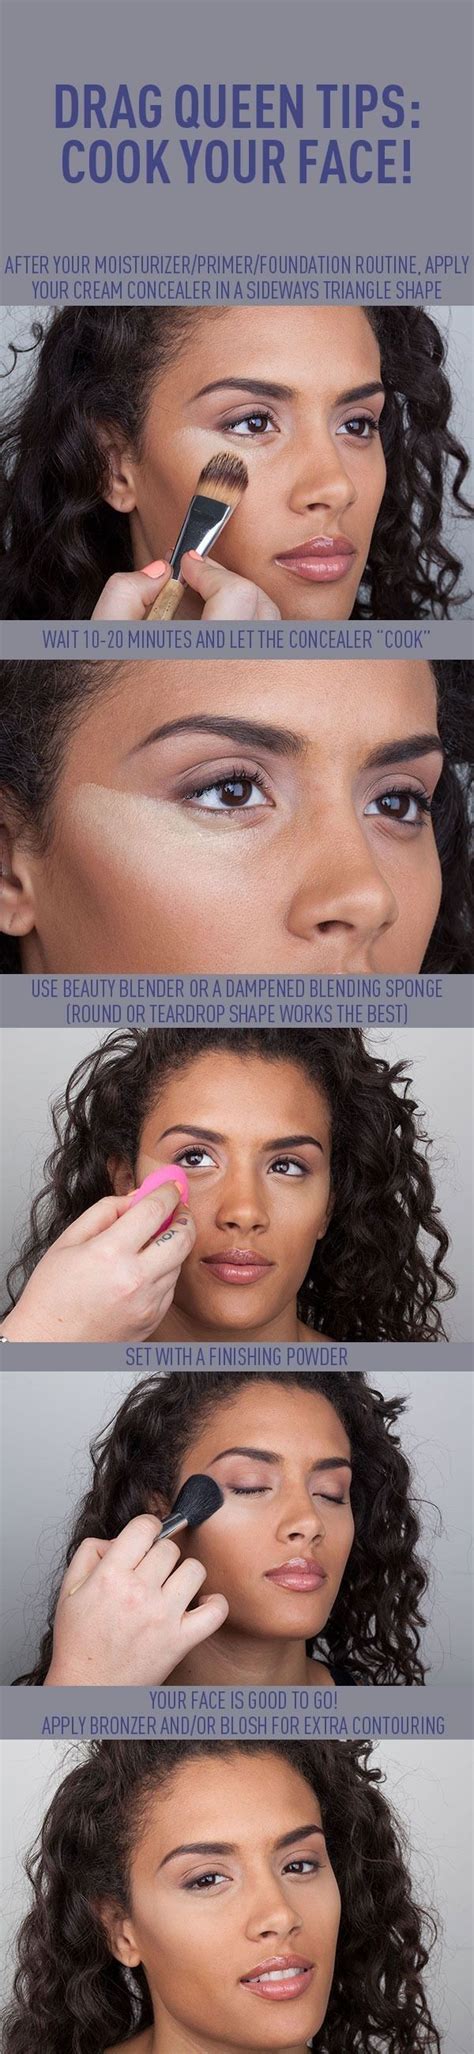 let your concealer “cook” or oxidize and slowly melt on your face for a few minutes 19